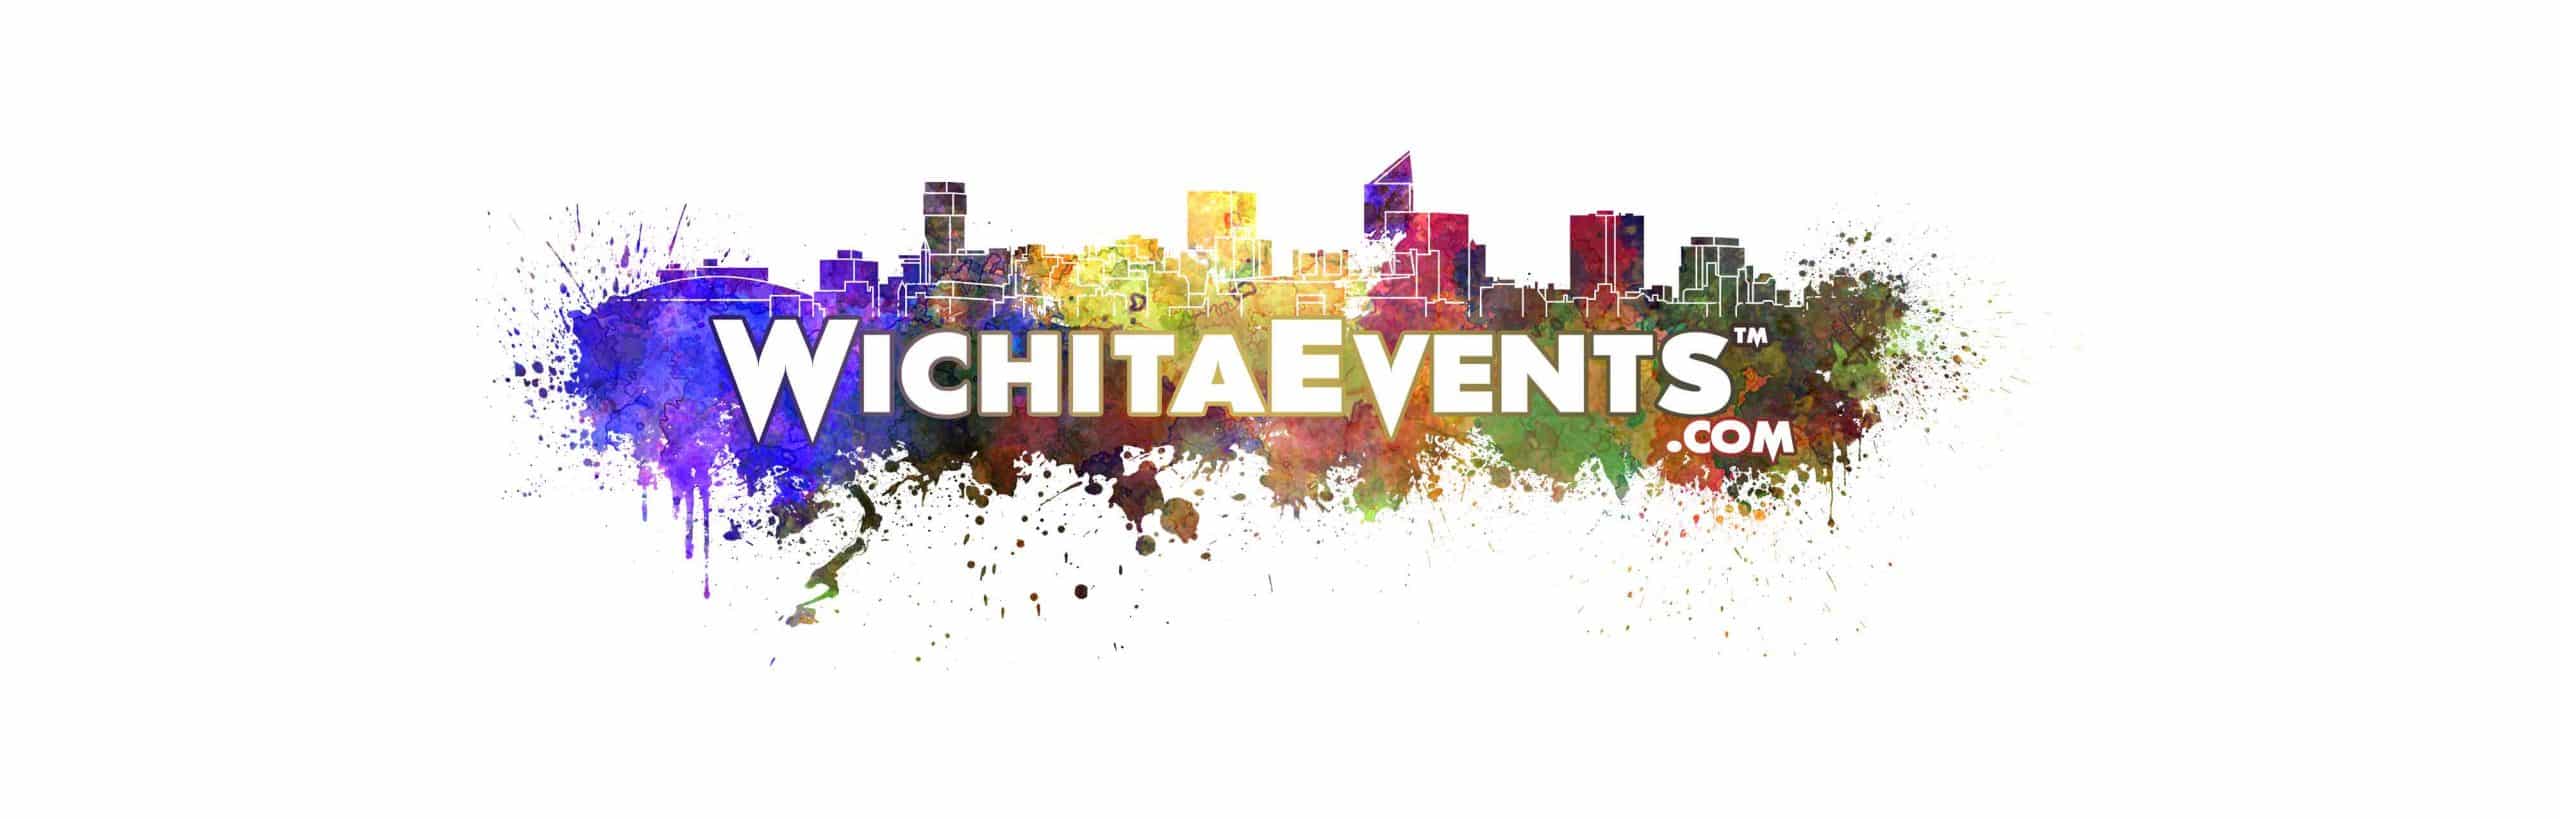 https://wichitaevents.com/wp-content/uploads/2021/05/Wichita-Events-LARGE-LOGO-Banner-LO-RES-scaled.jpg